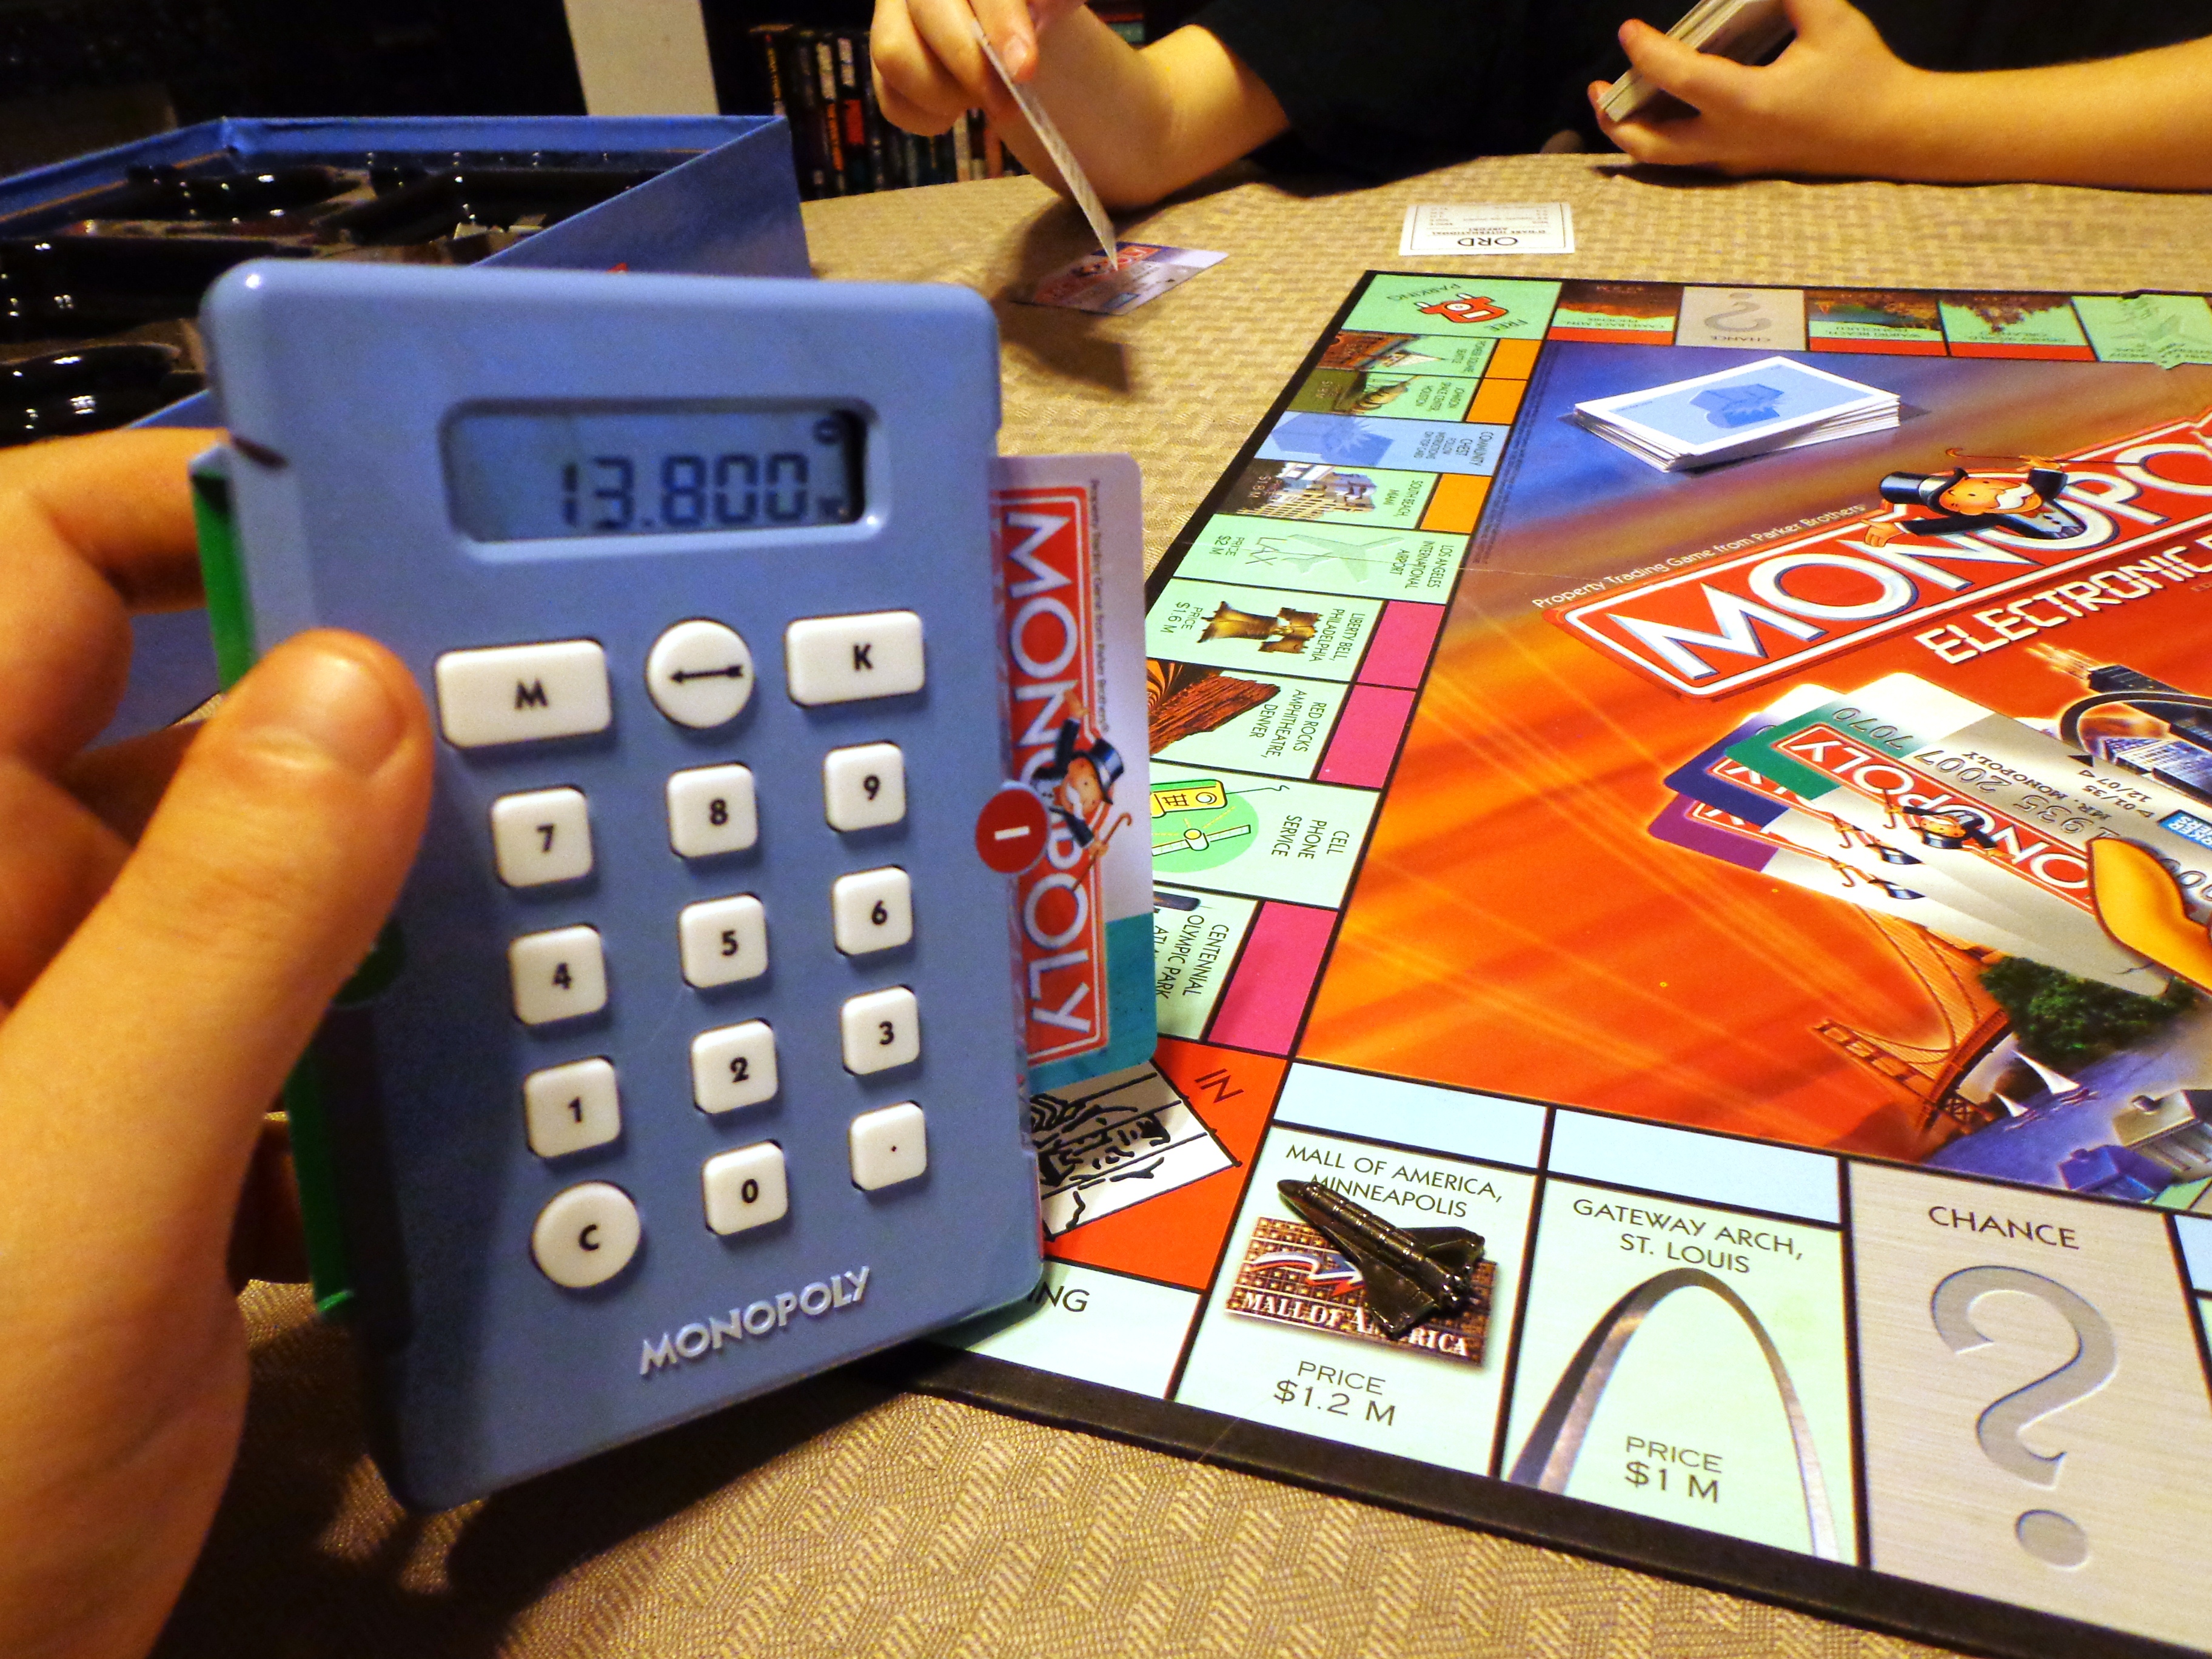 Monopoly: Electronic Banking Edition